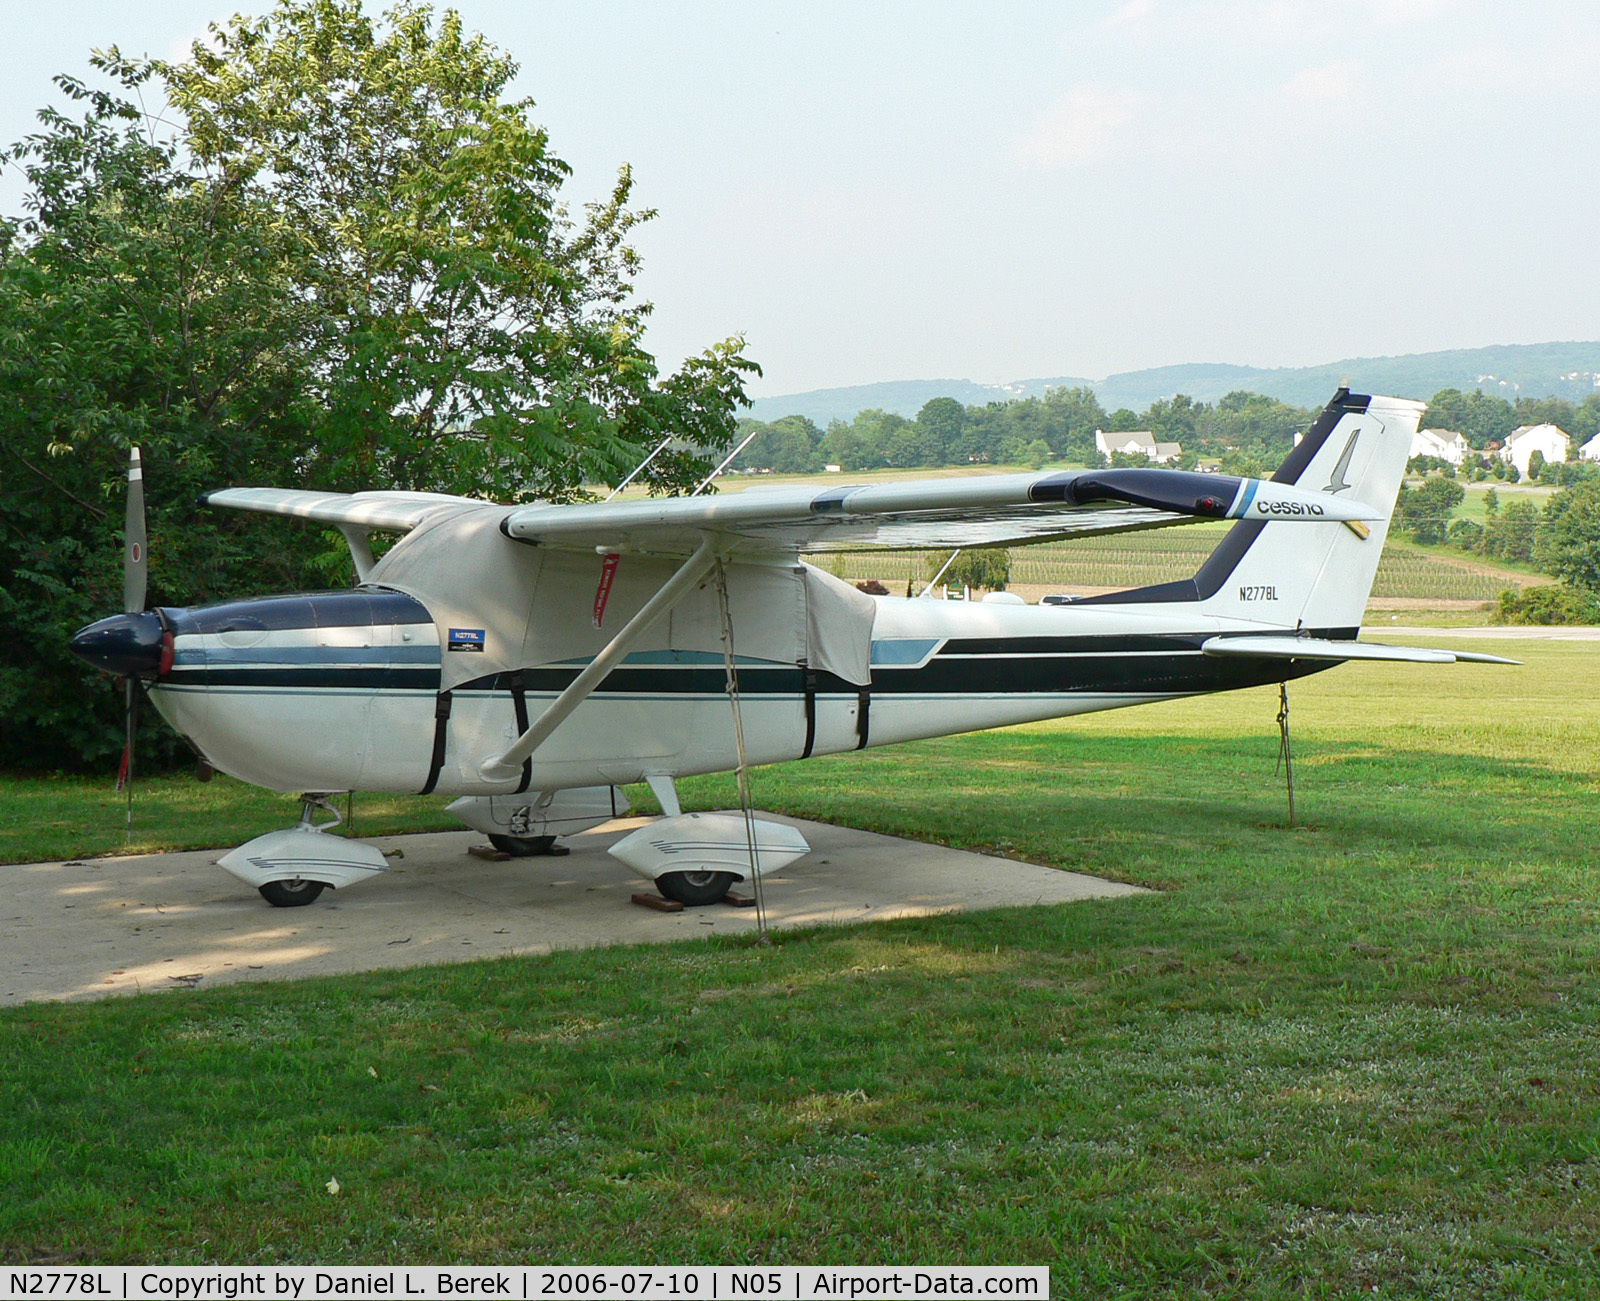 N2778L, 1967 Cessna 172H C/N 17255978, This well-kept 1967 Skyhawk resides at Hackettstown Airport.